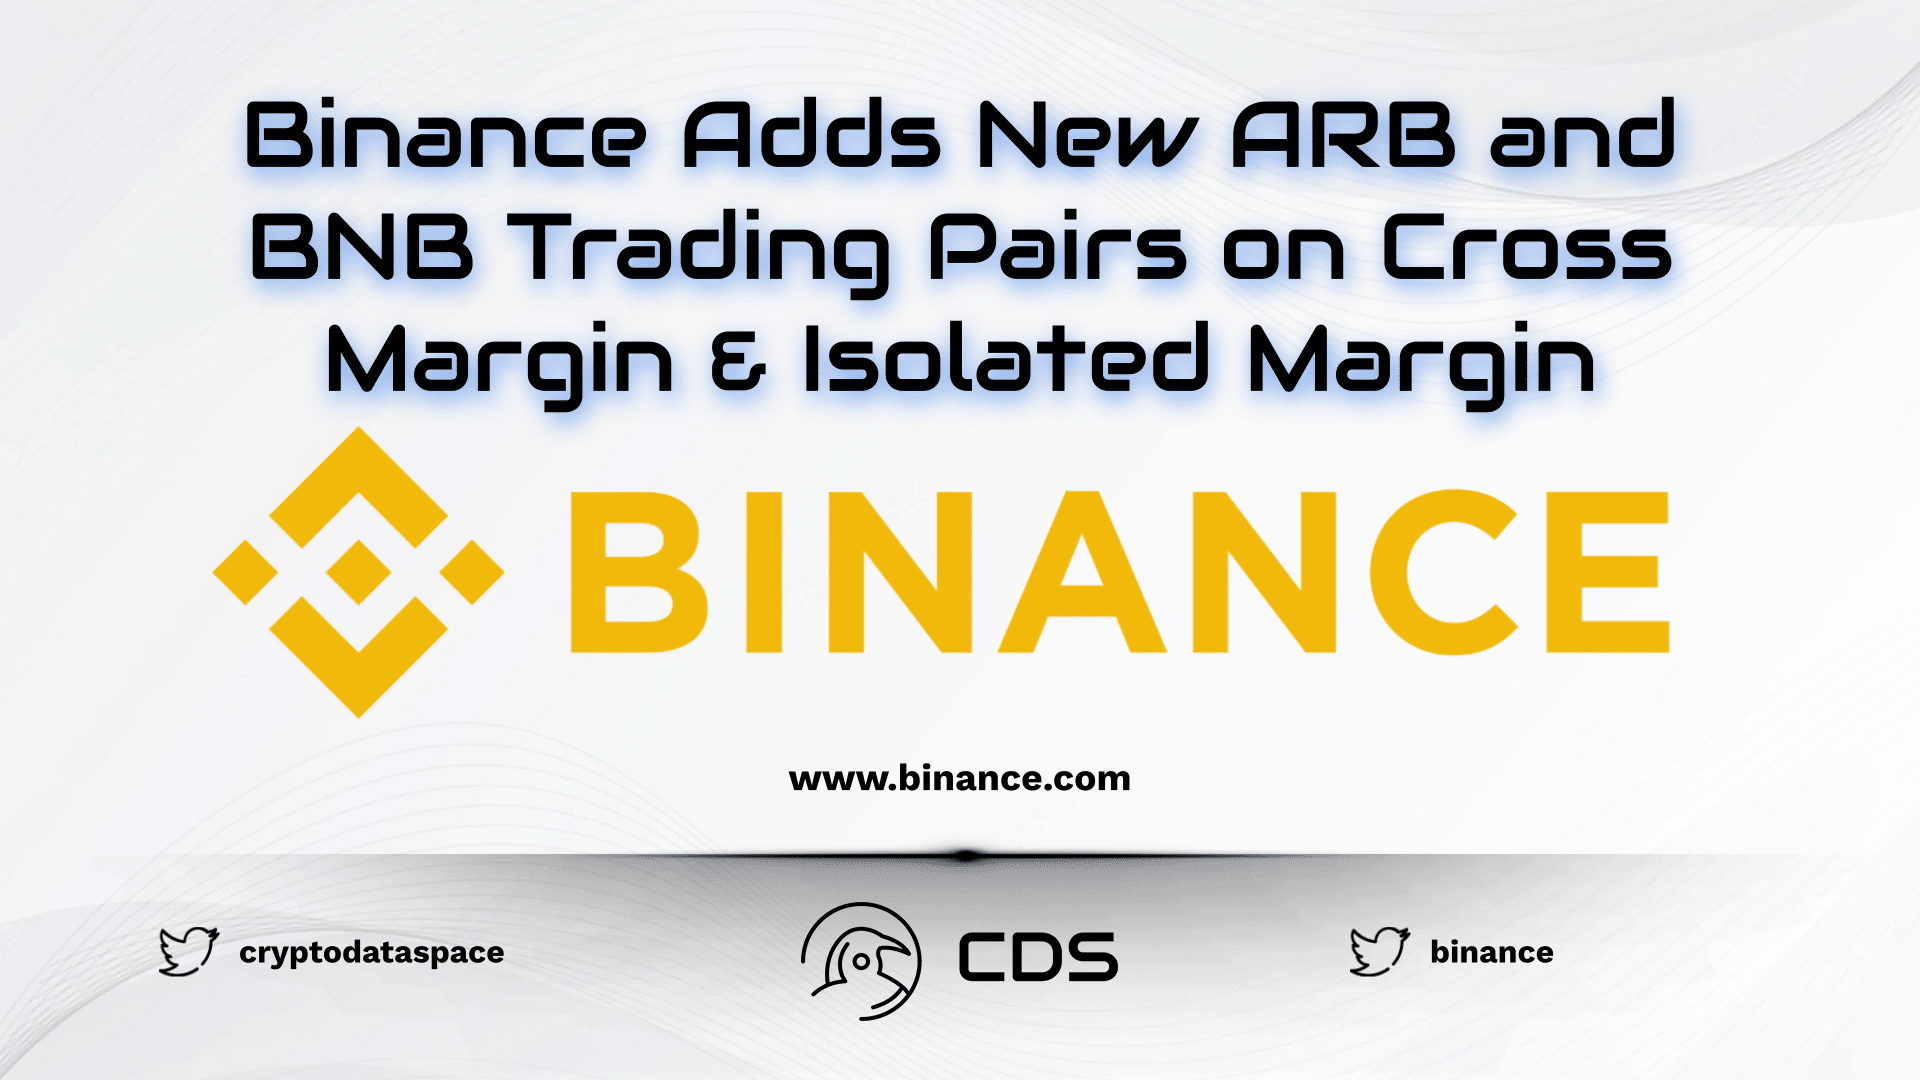 Binance Adds New ARB and BNB Trading Pairs on Cross Margin & Isolated Margin